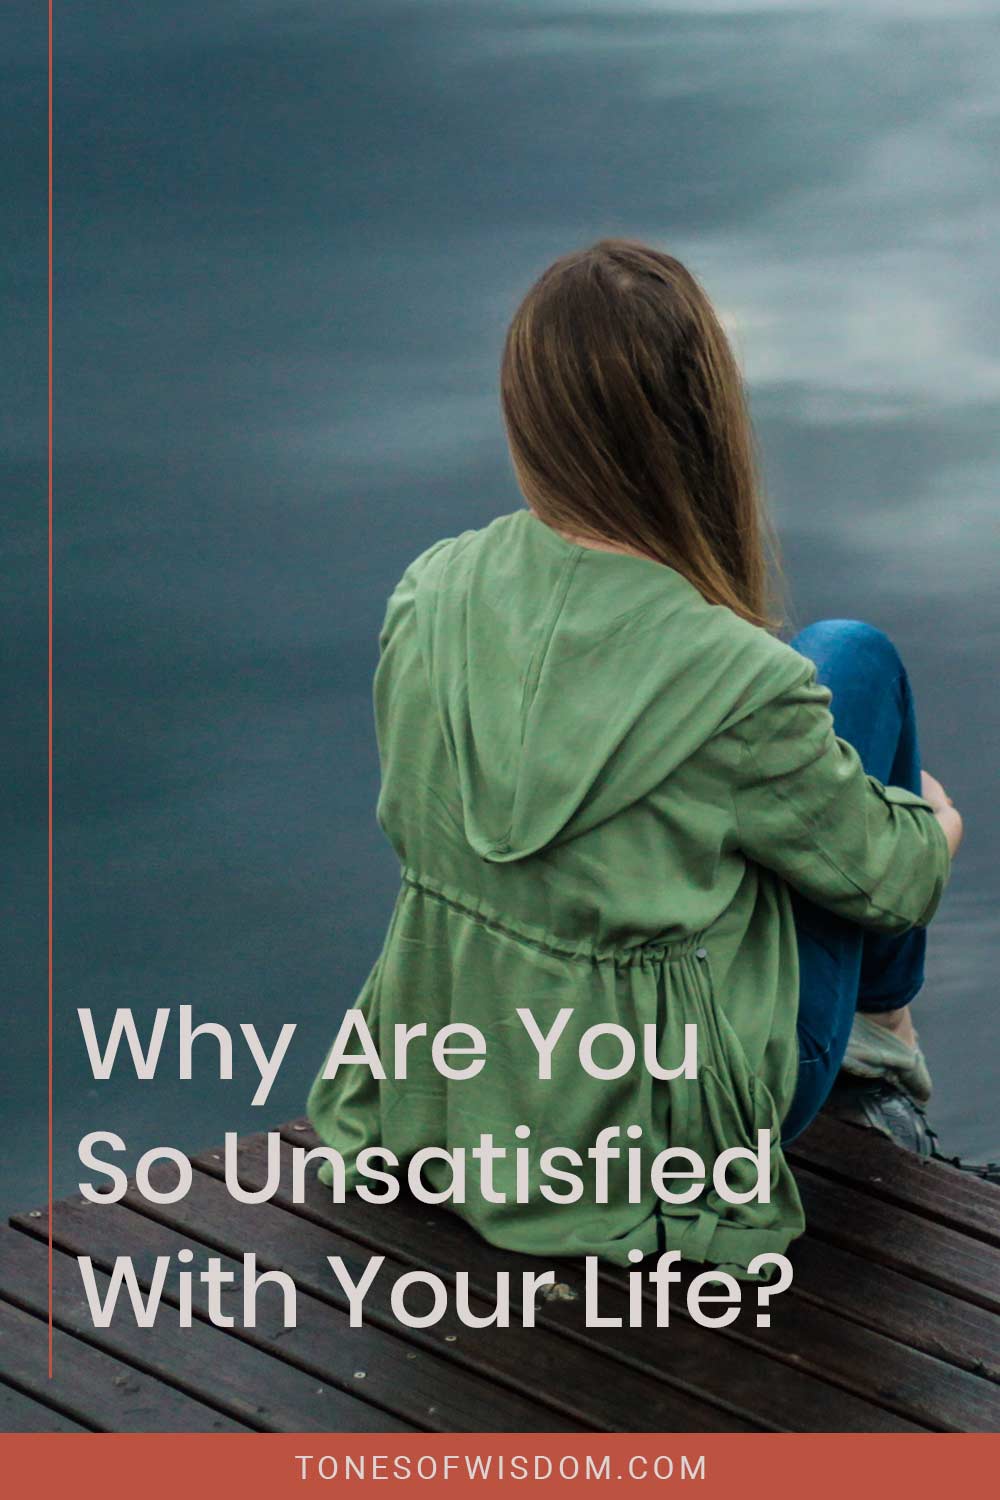 Why Are You So Unsatisfied With Your Life?